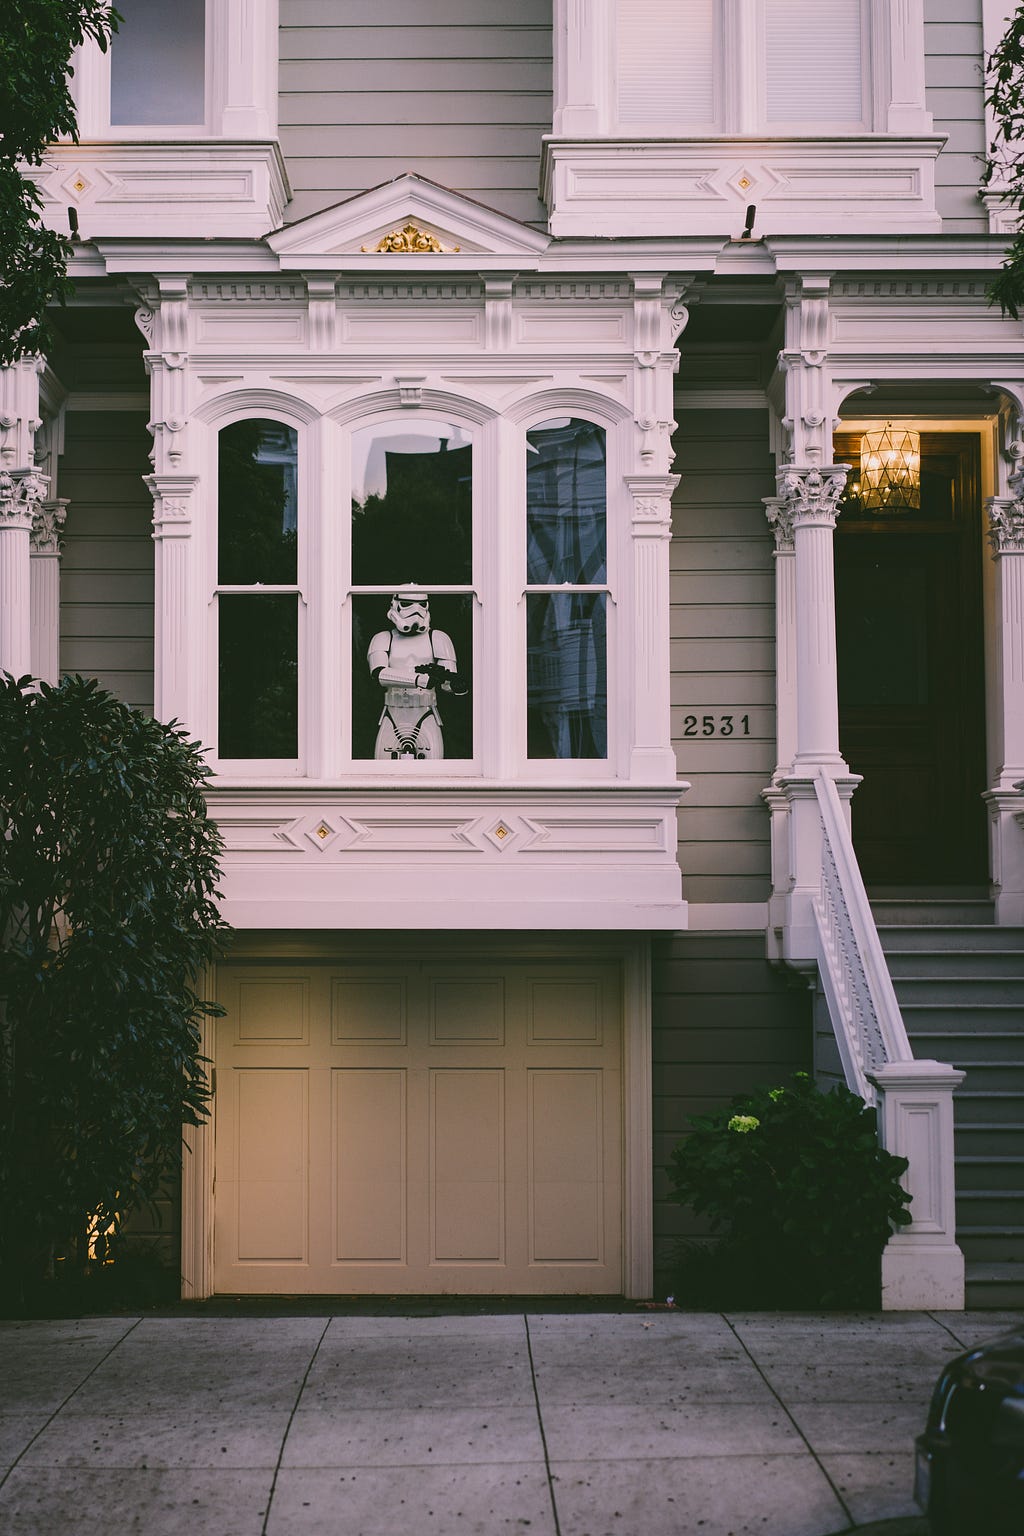 stormtrooper guarding the house